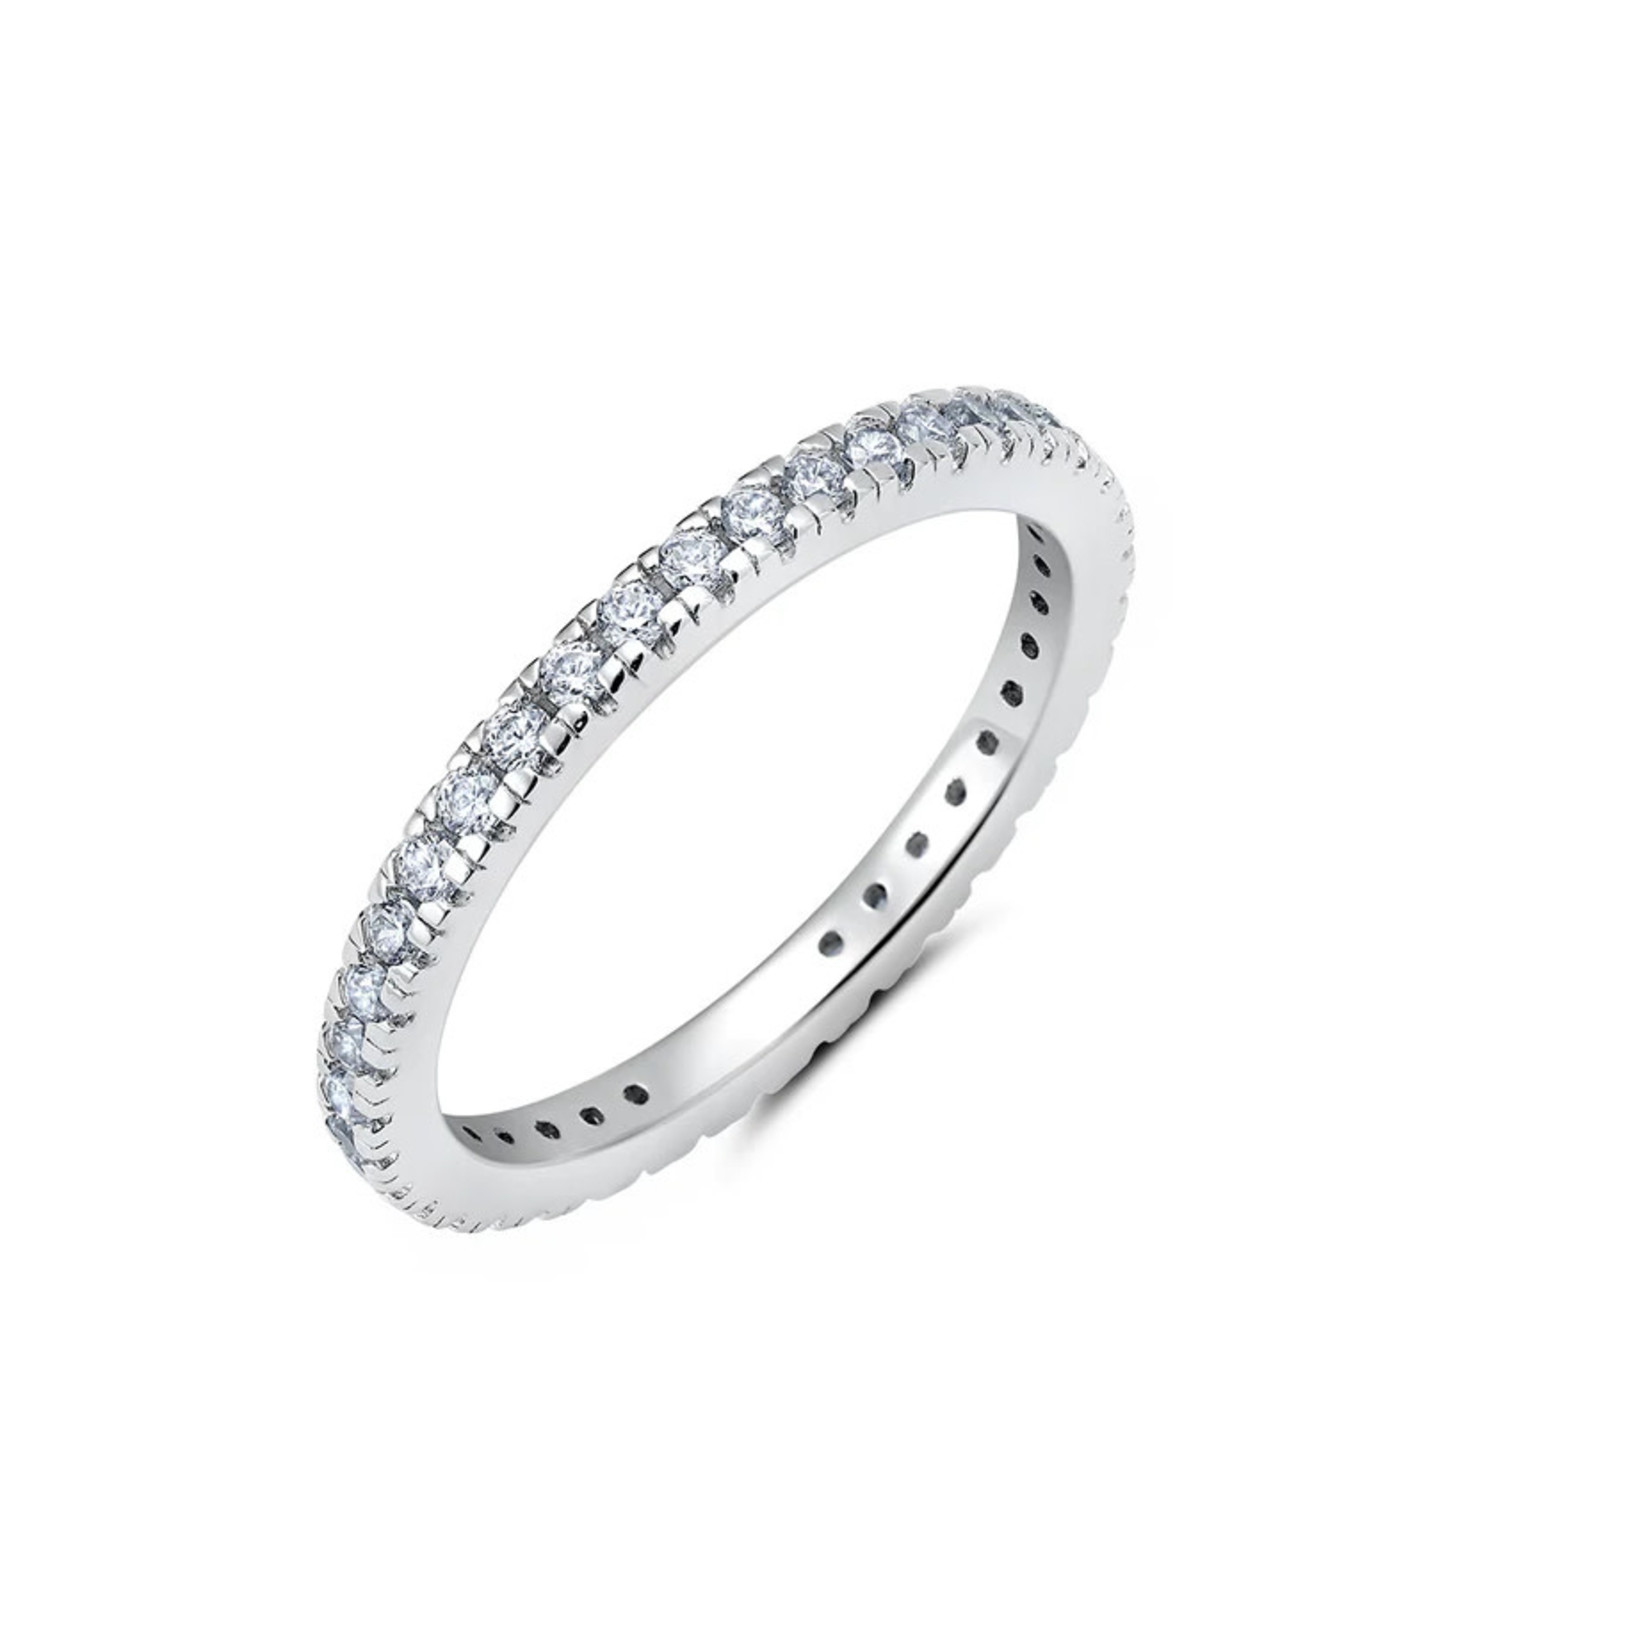 Clear Hand Set CZ Step Cut Eternity Band Engagement Ring Finished In Pure Platinum 901227R70CZ